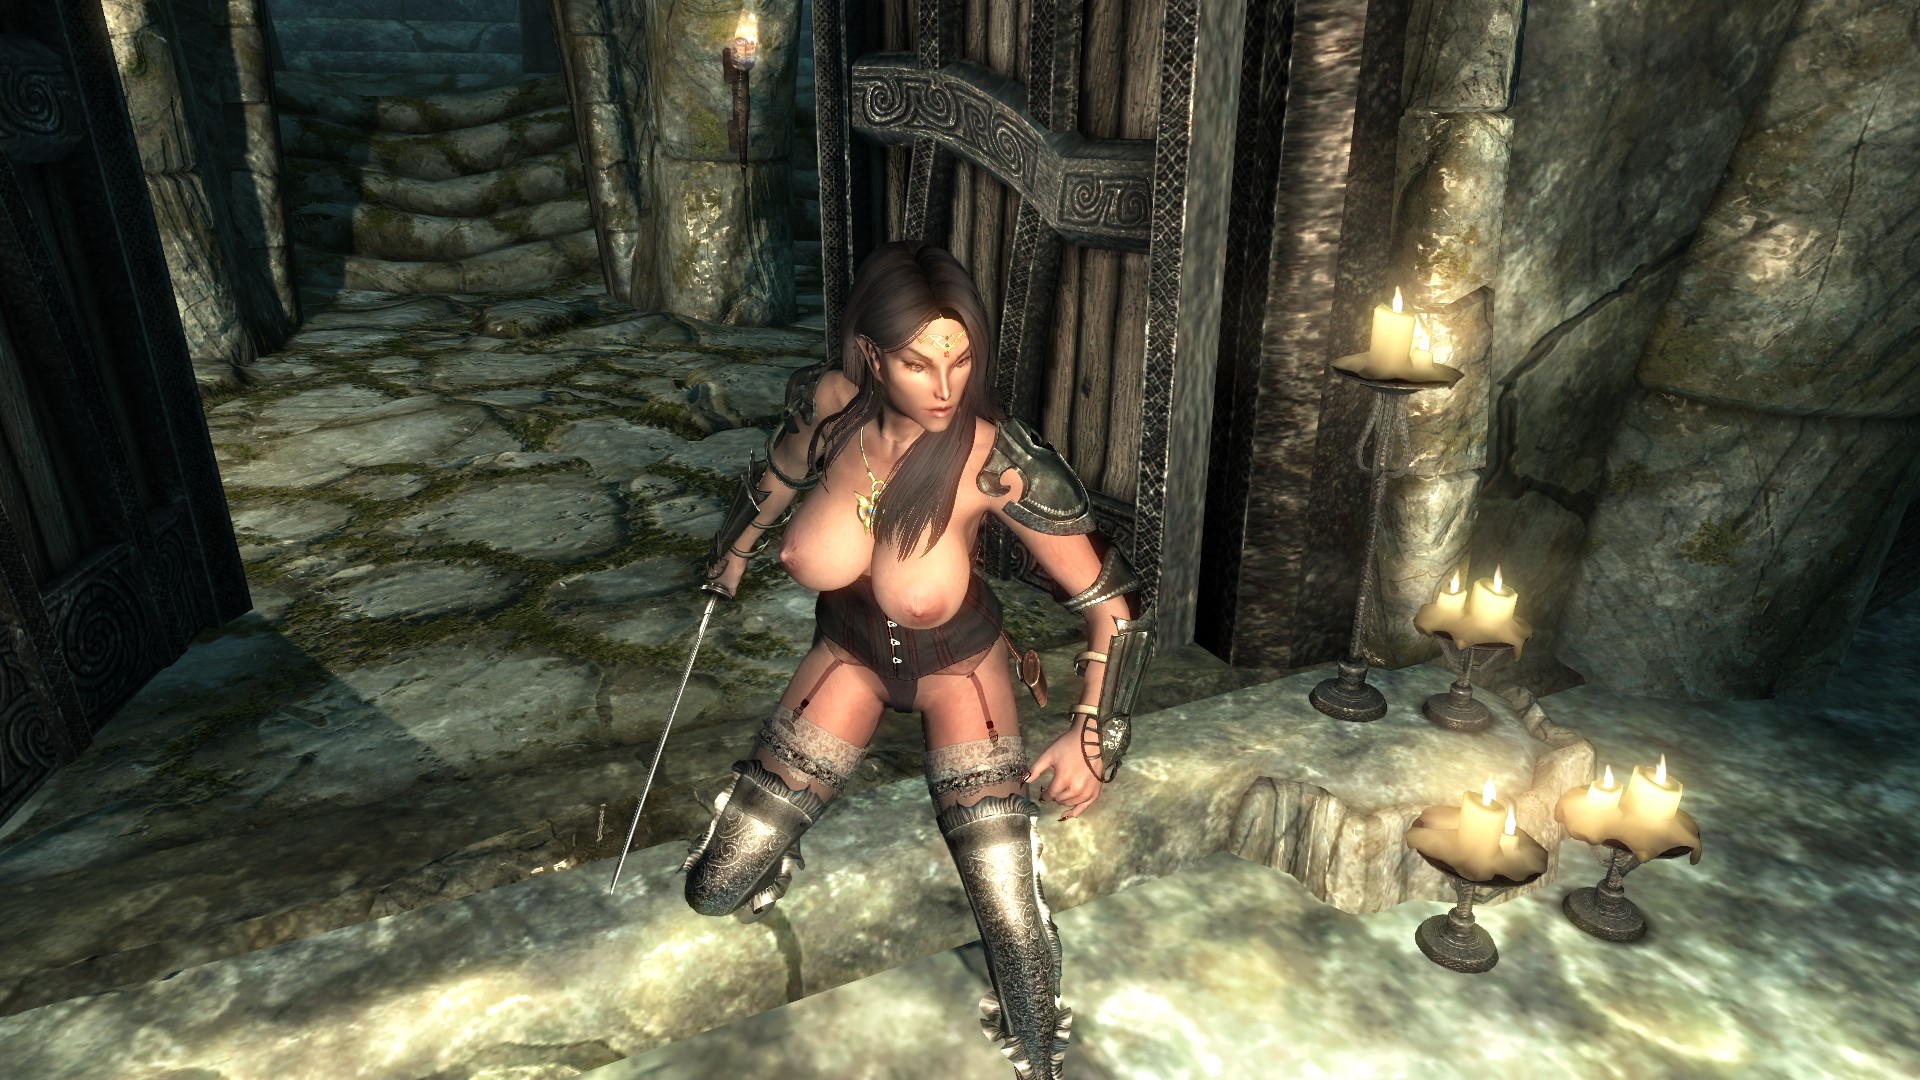 ...story suggestions skyrim adult mods loverslab, topless armor request fin...